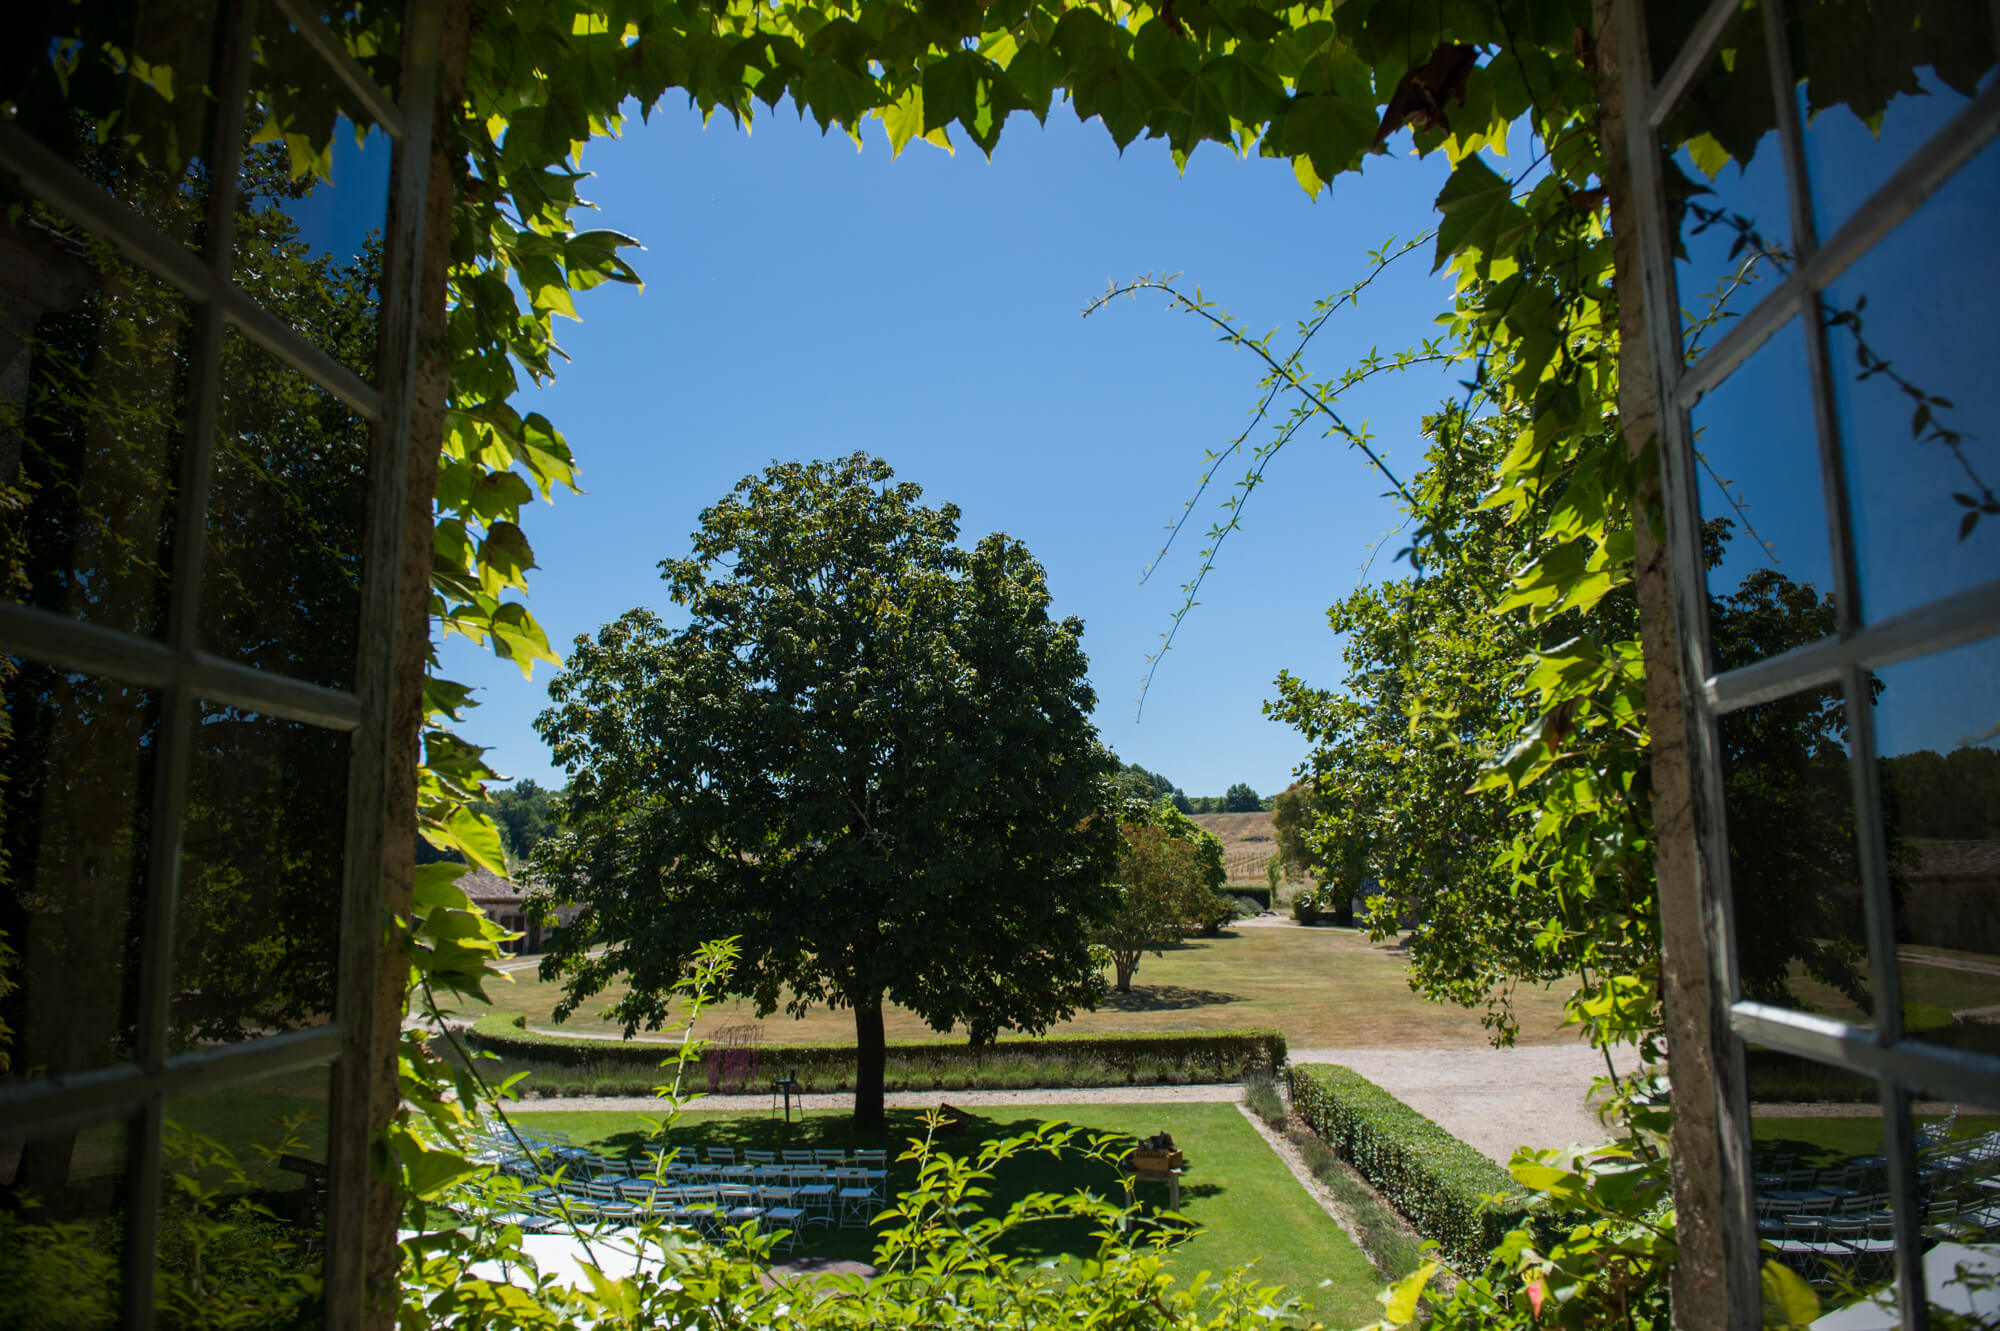 A view from the window at Chateau Rigaud showing blue skies and the stunning bordeaux countryside